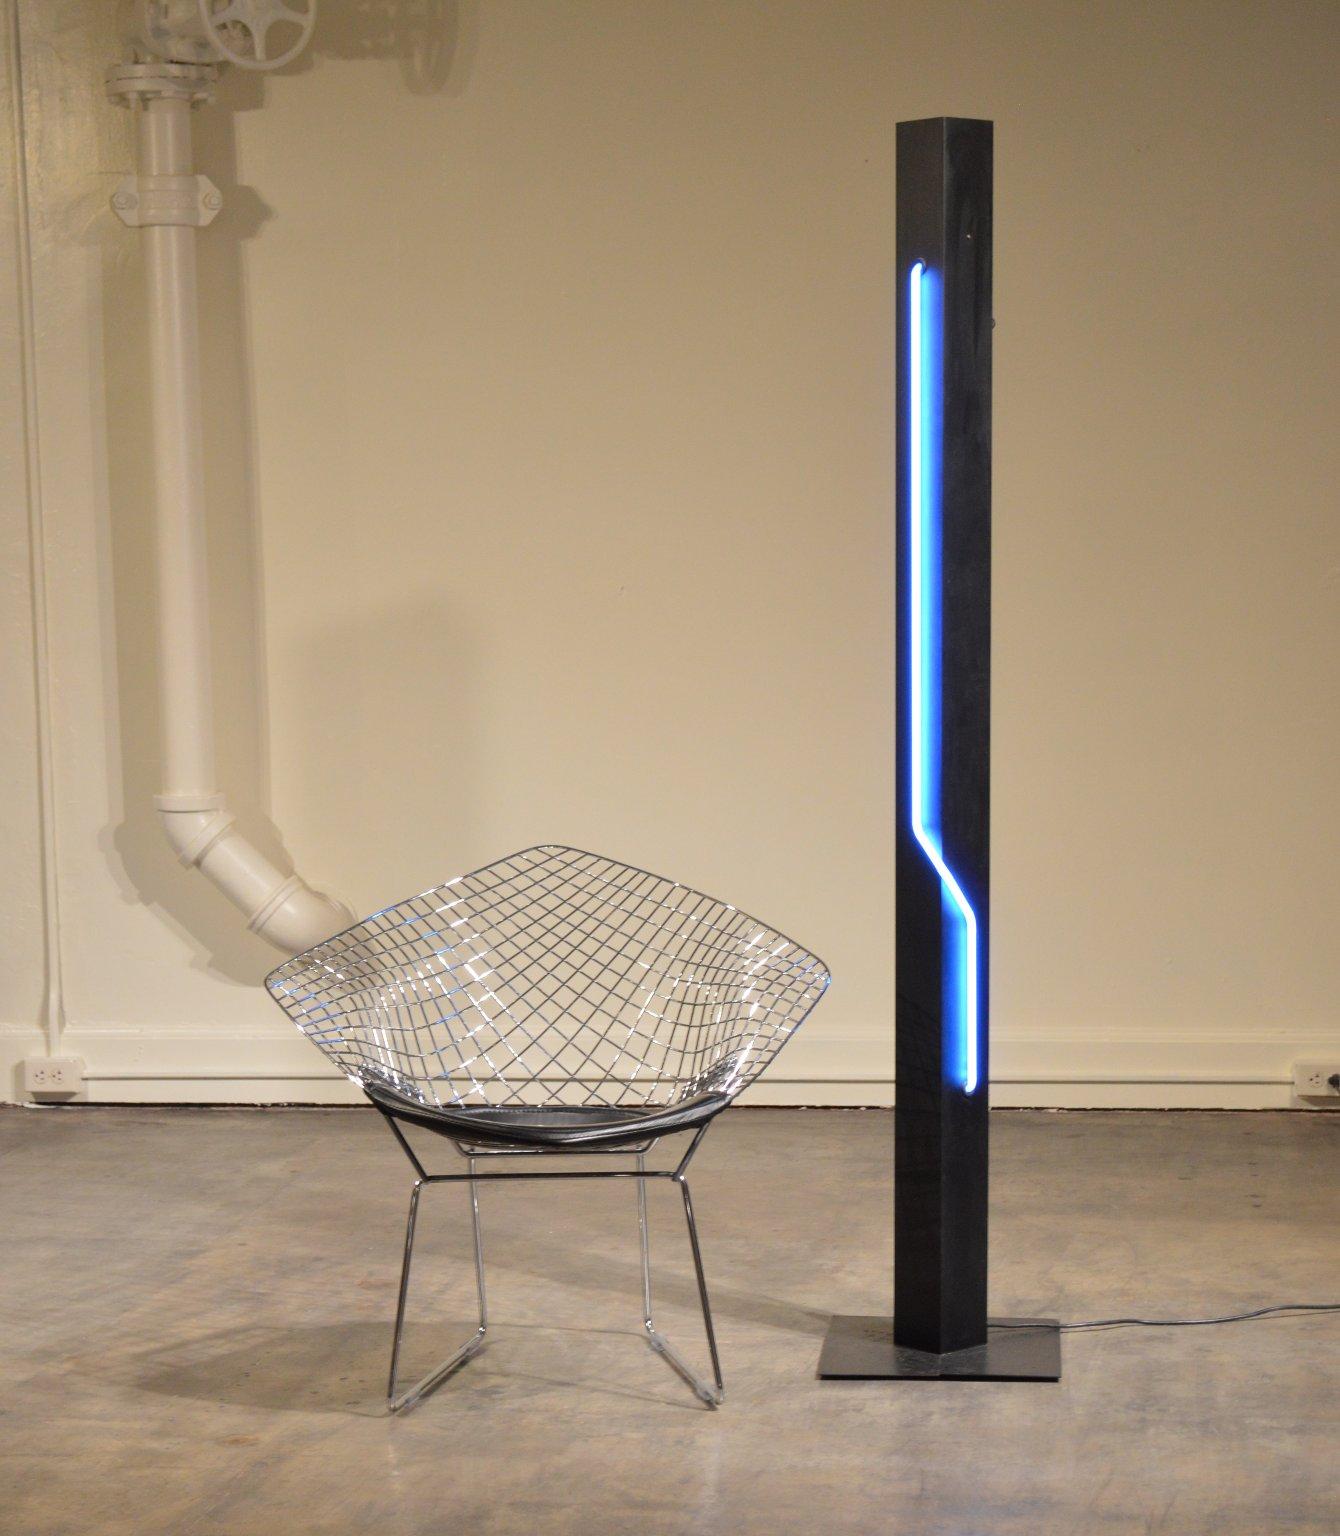 Late 20th Century Post-Modern Blue Neon Torchiere Floor Lamp by Let There Be Neon for Kovacs  For Sale